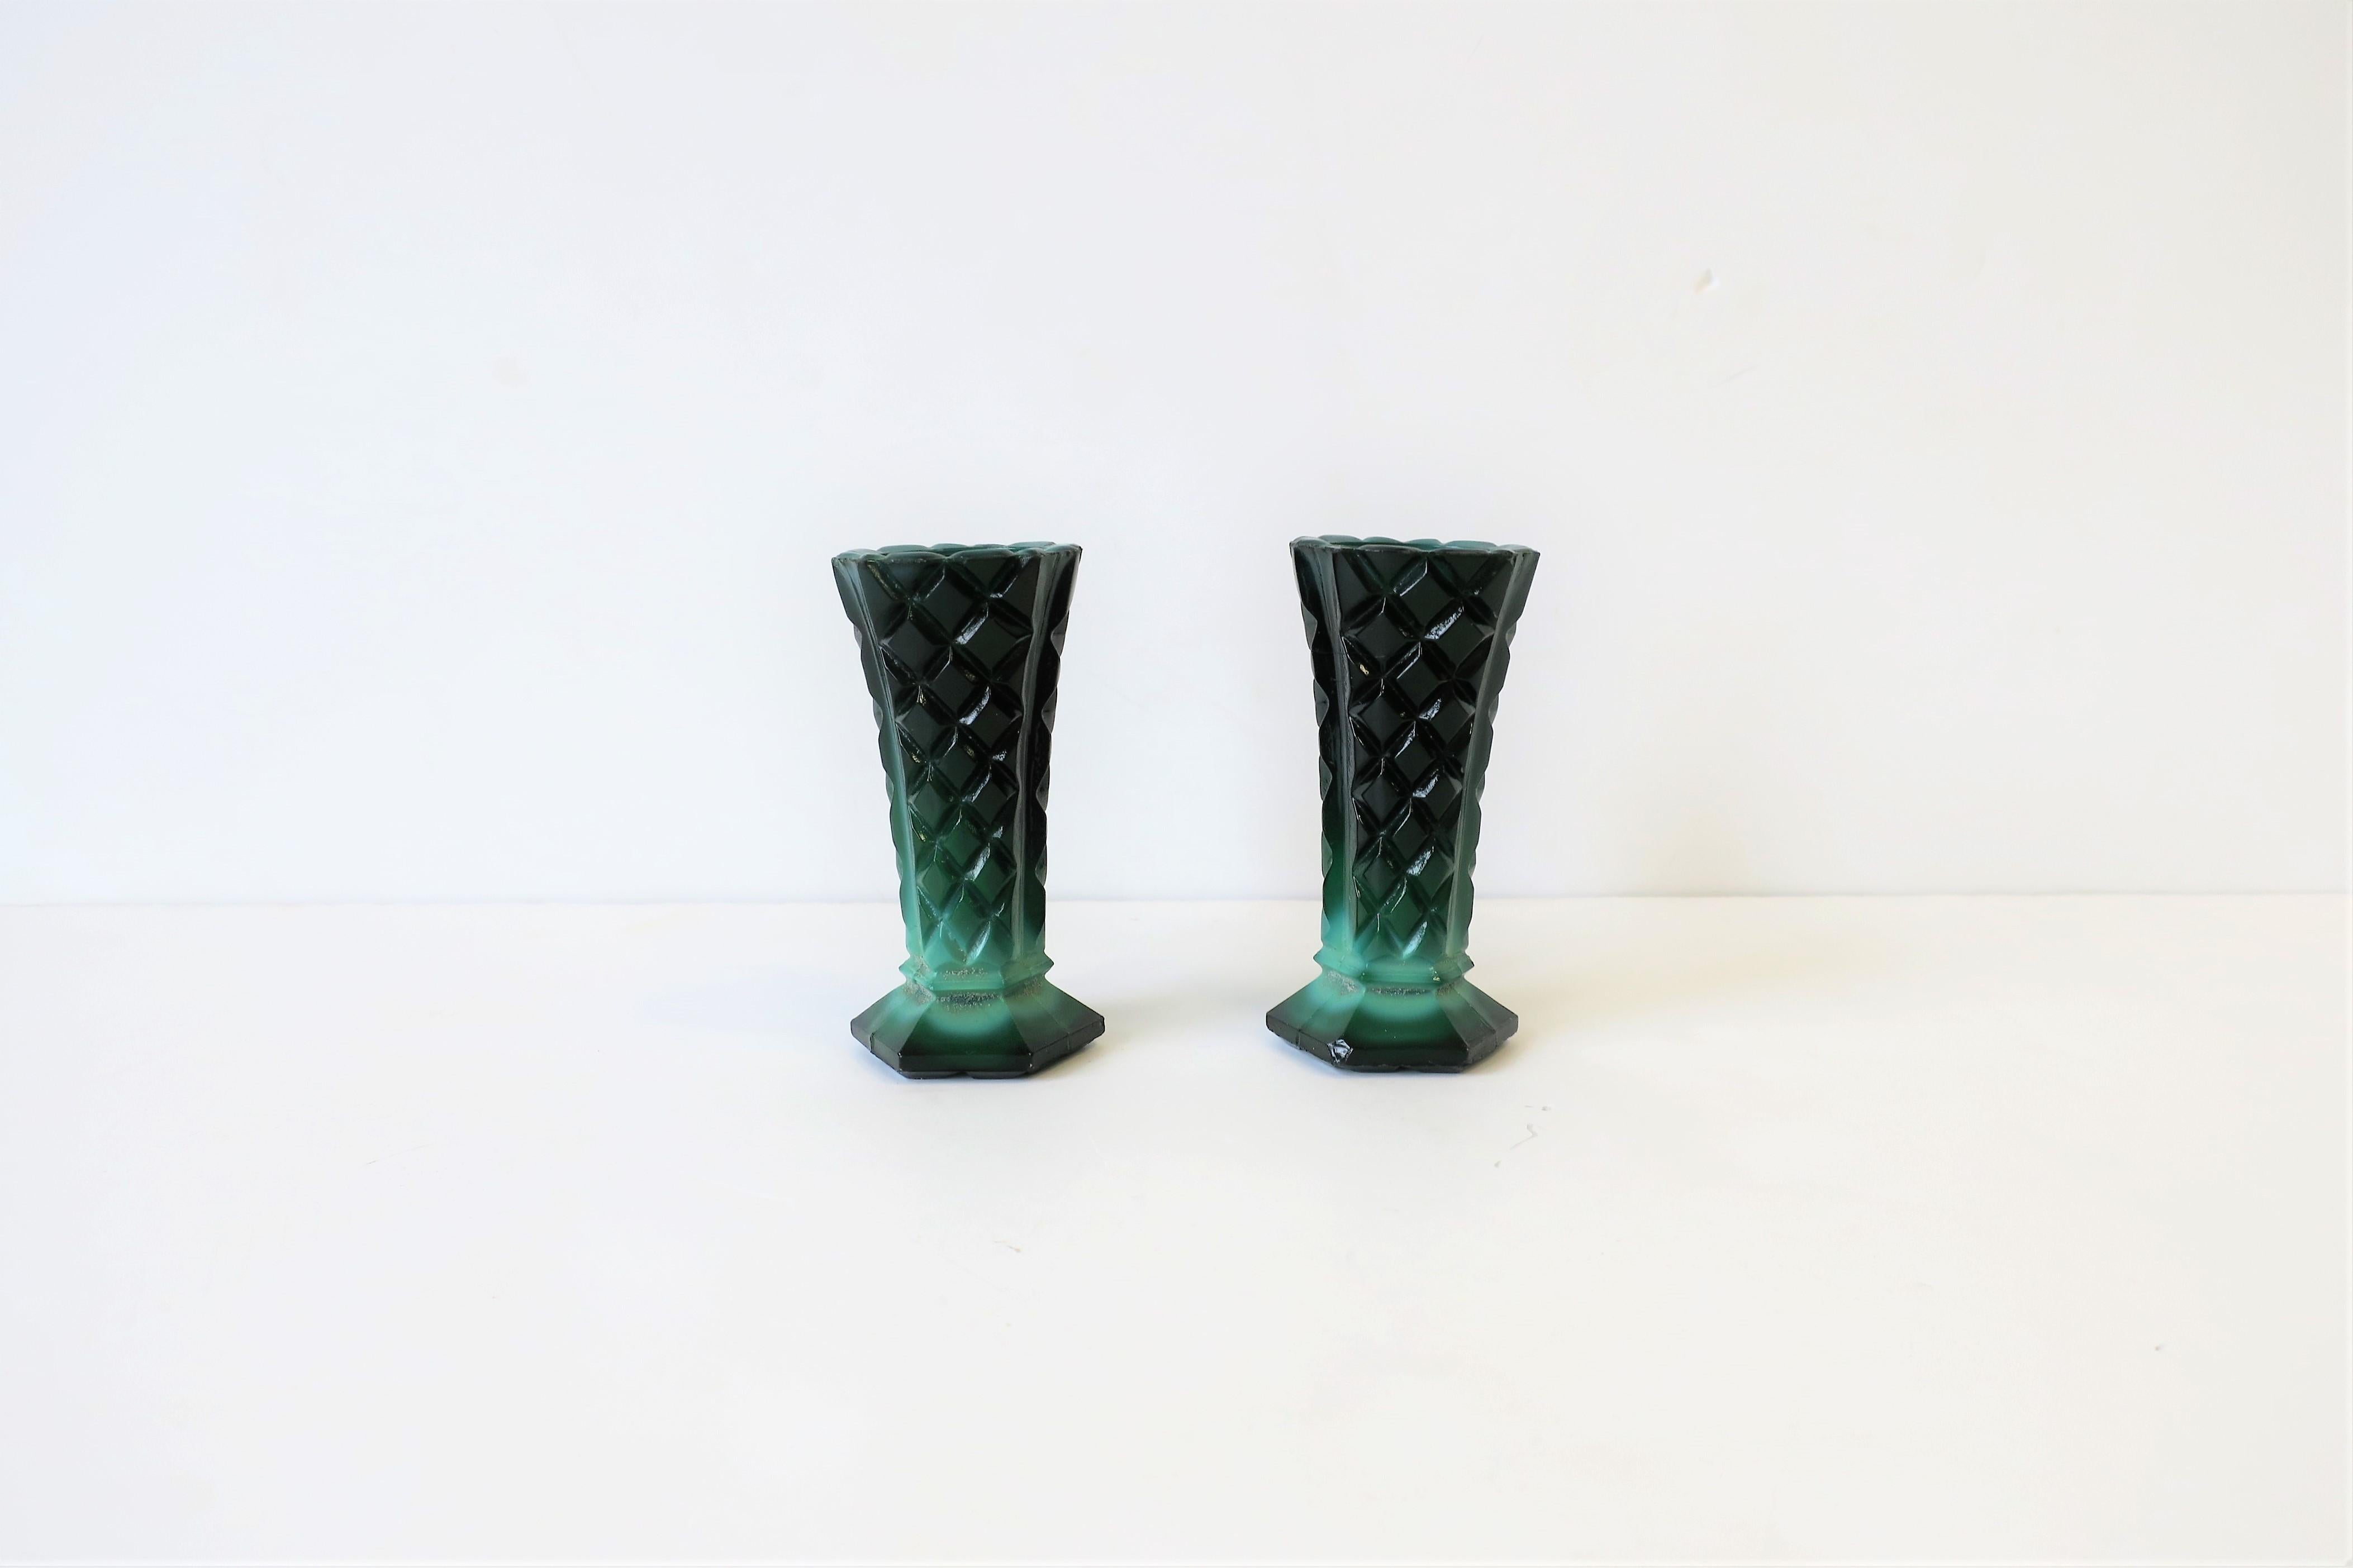 A small pair of green malachite Bohemian glass vases with a diamond quilted design and octagonal bases, circa early-20th century, Europe, Czechoslovakia. Dimensions: 2